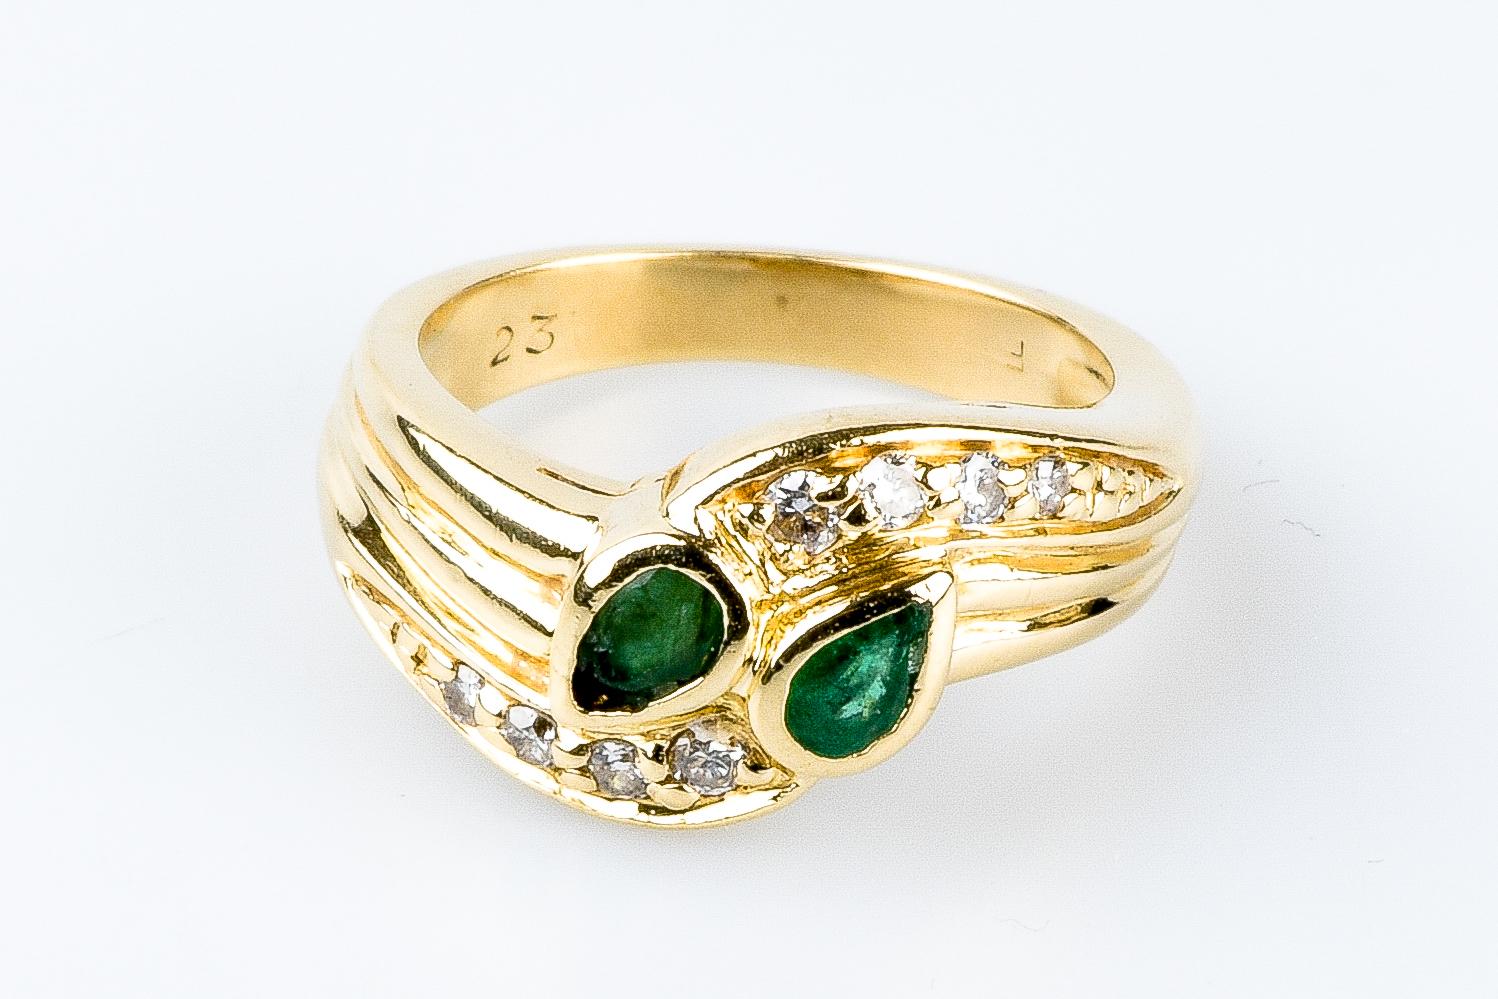 18 carat yellow gold emeralds diamonds ring designed with 2 emeralds weighing 0.16 carat and 8 round brilliant cut diamonds, 2 diamonds weighing 0.048 carat, 4 diamonds weighing 0.048 carat and 2 diamonds weighing 0.02 carat.                   